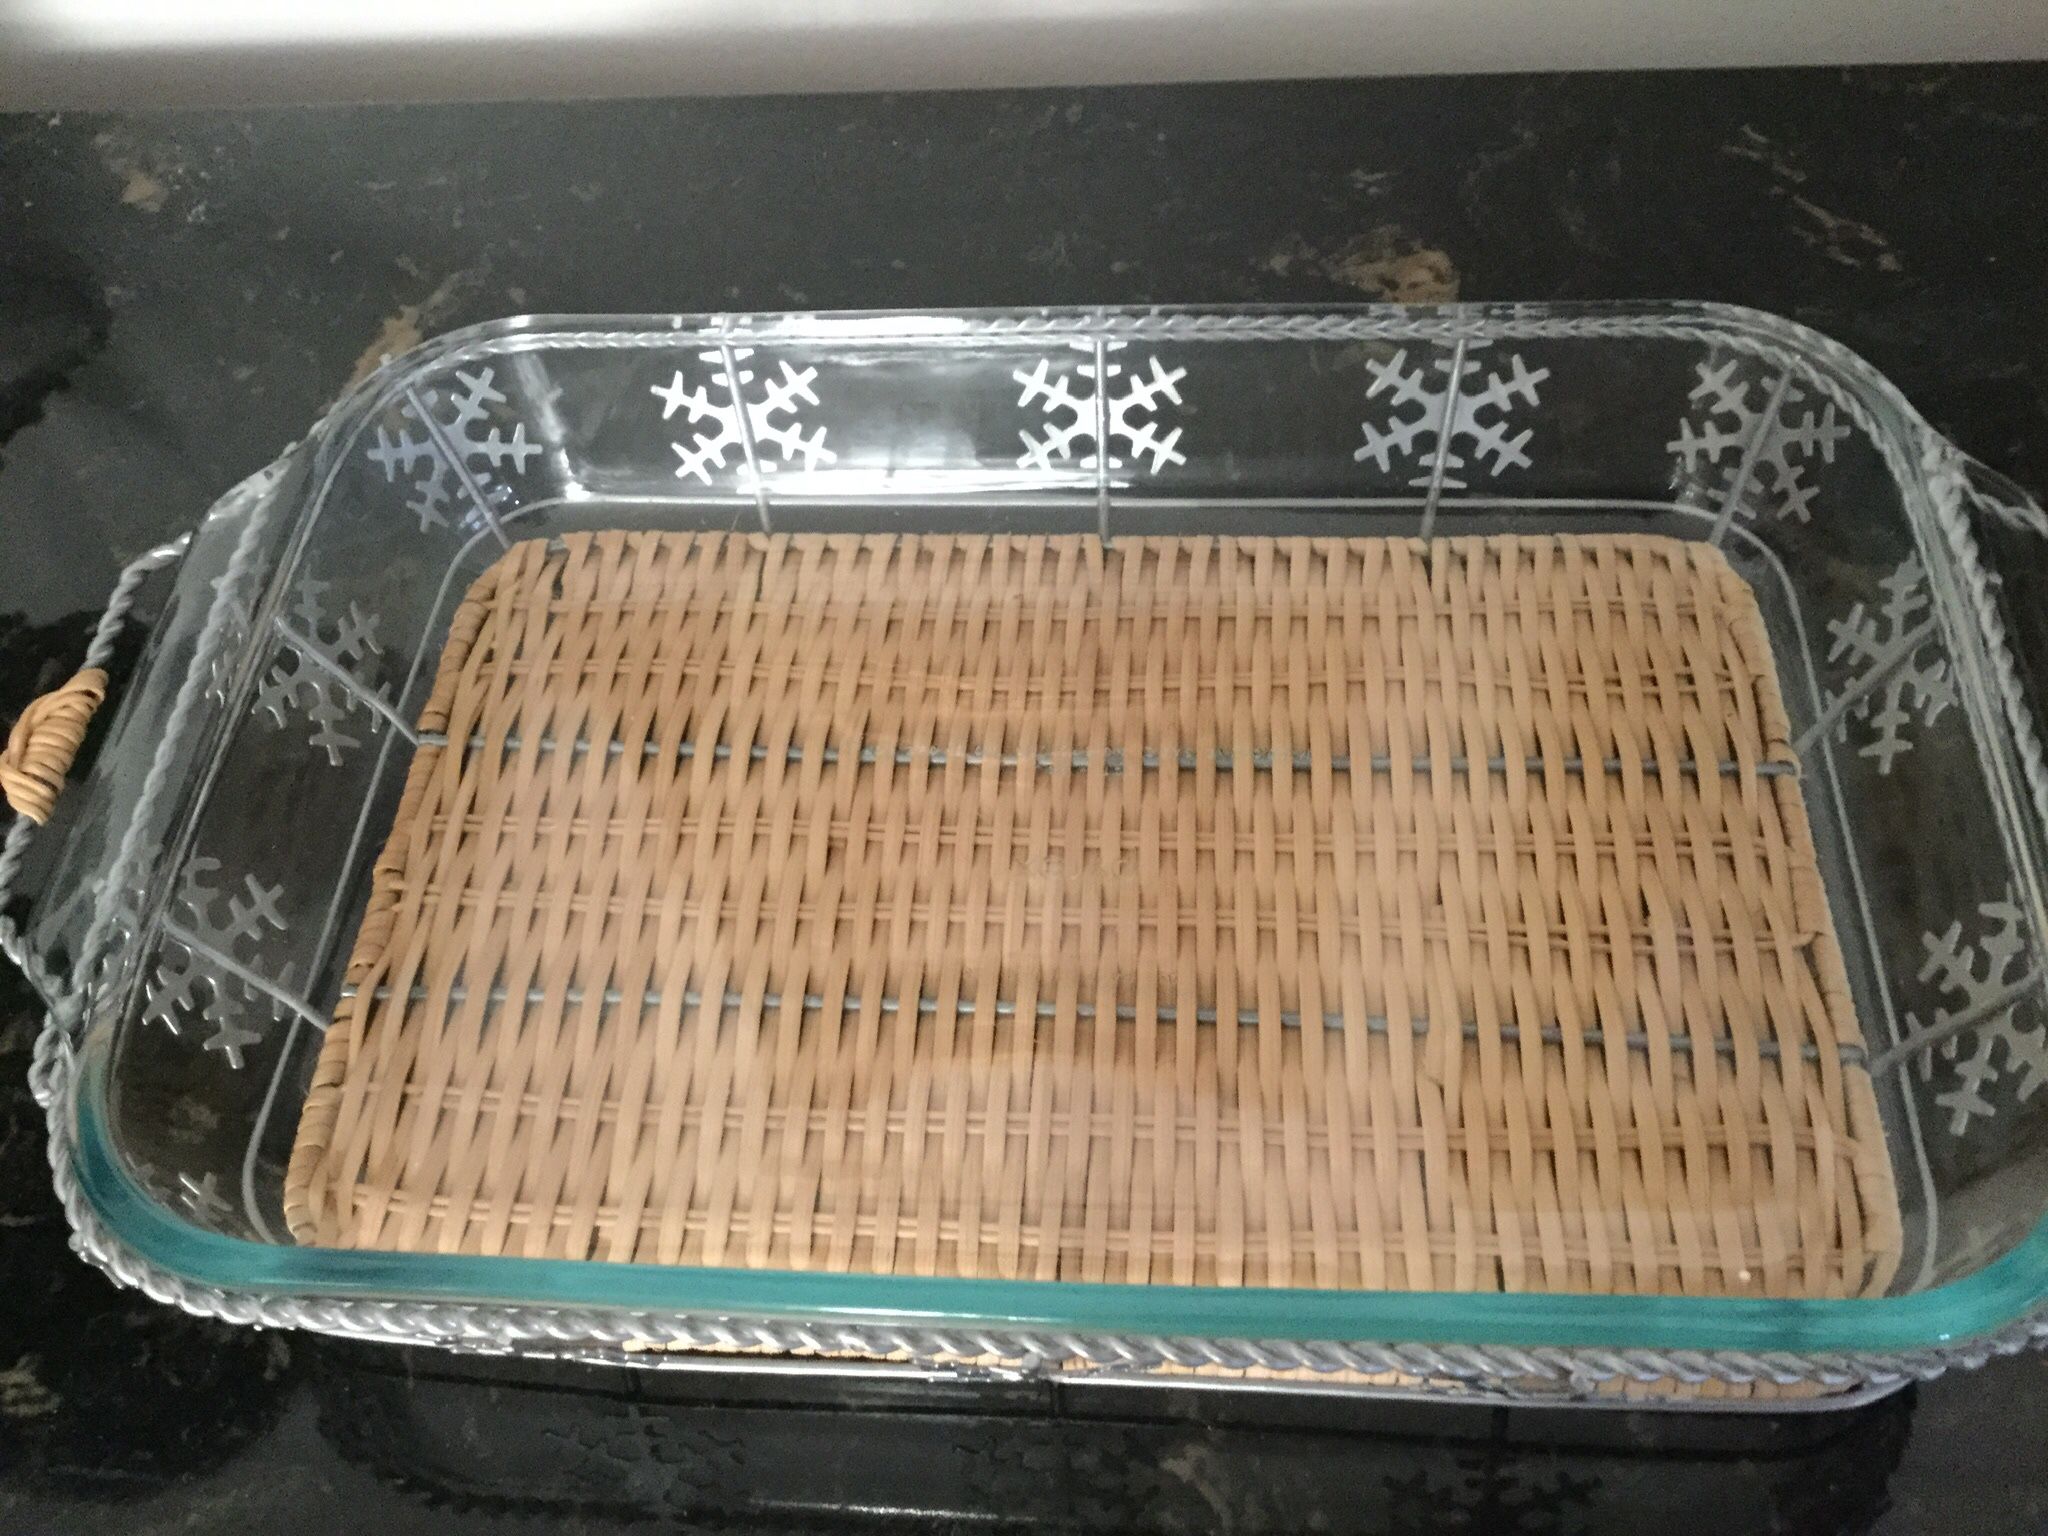 9x 13 Pyrex Baking Dish With Cradle